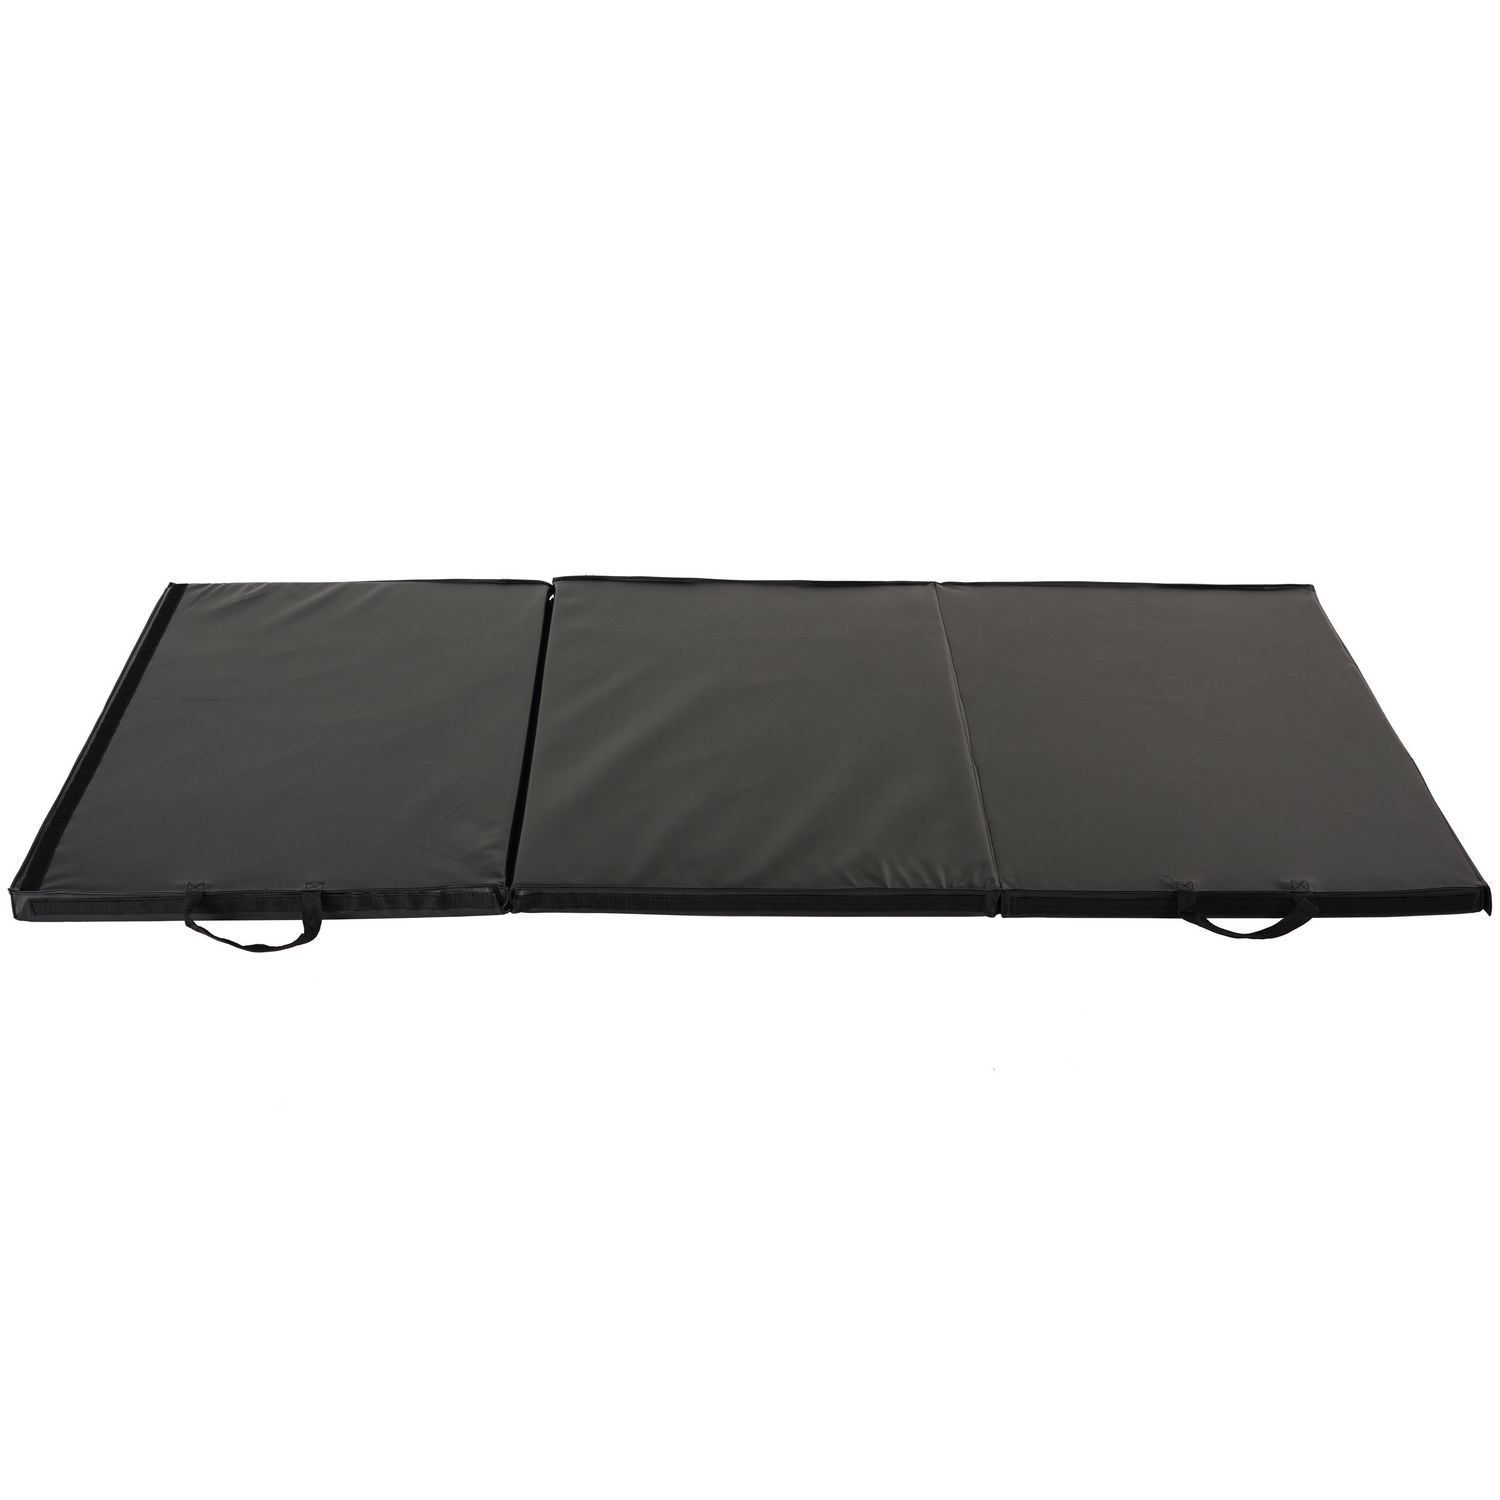 Econofitness Exercise Mat, Solid Black, 12-mm